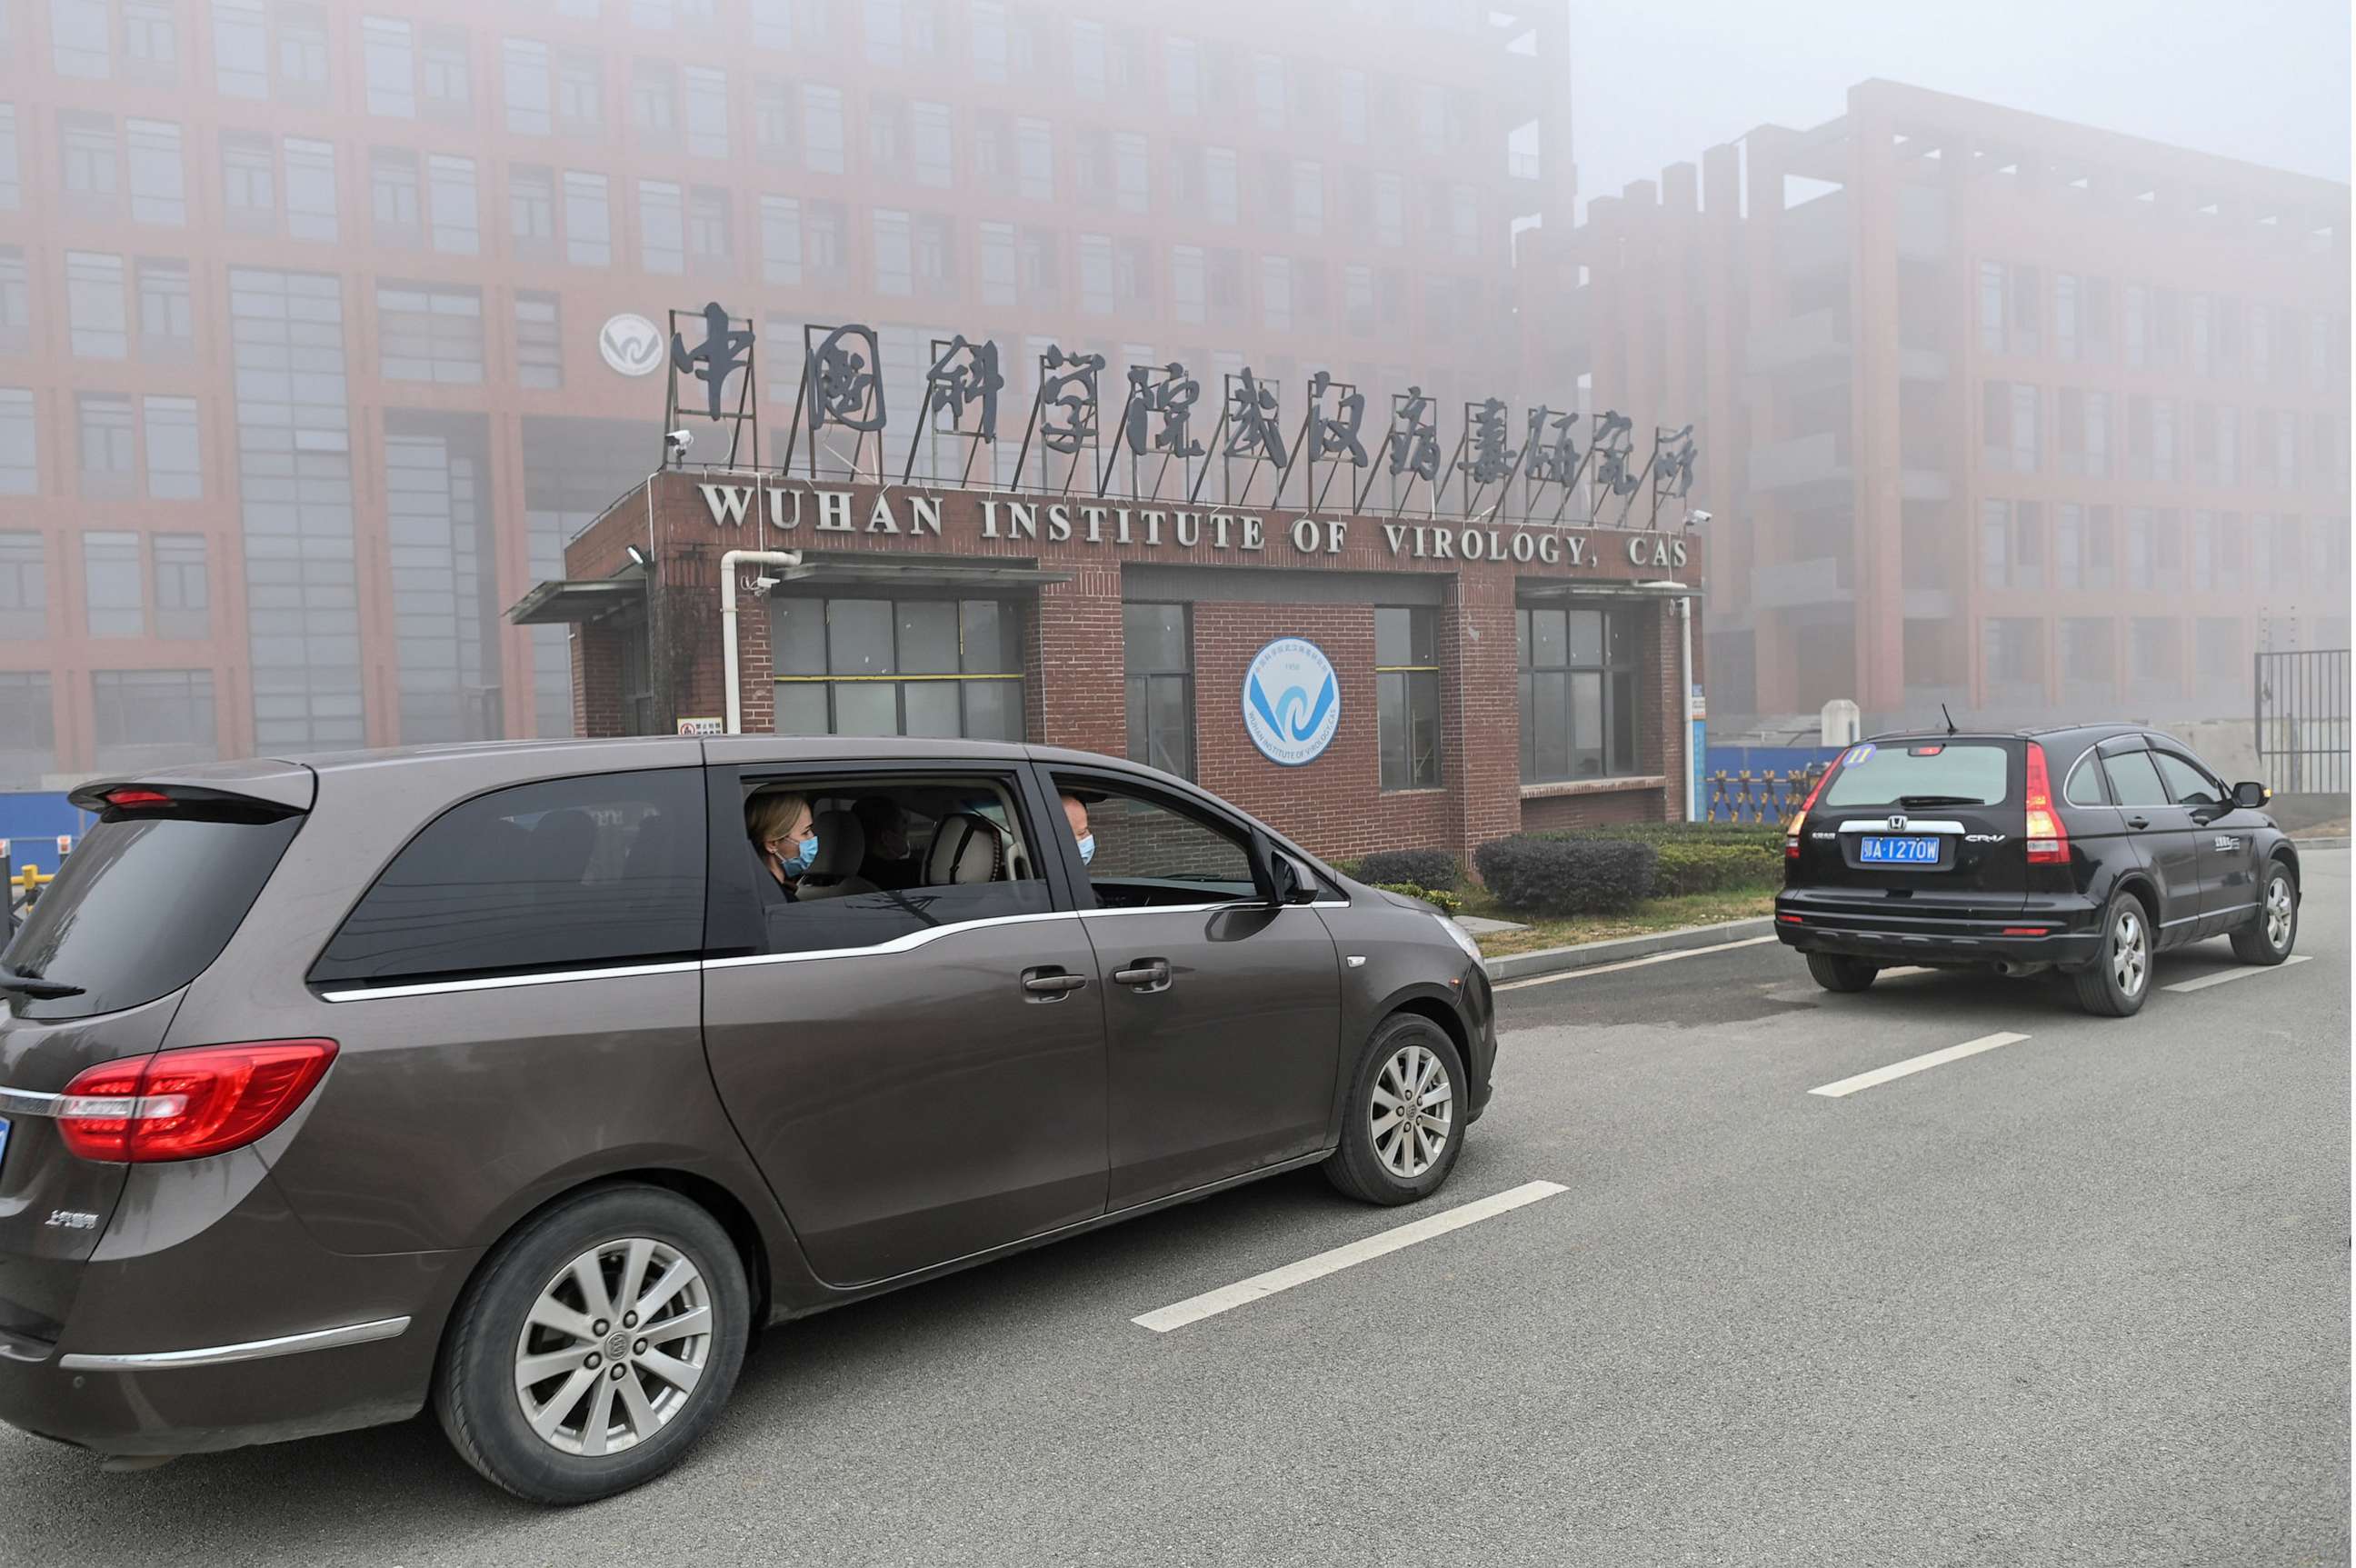 PHOTO: Members of the World Health Organization (WHO) team investigating the origins of the COVID-19 coronavirus, arrive at the Wuhan Institute of Virology, Feb. 3, 2021, in Wuhan in China's central Hubei province.